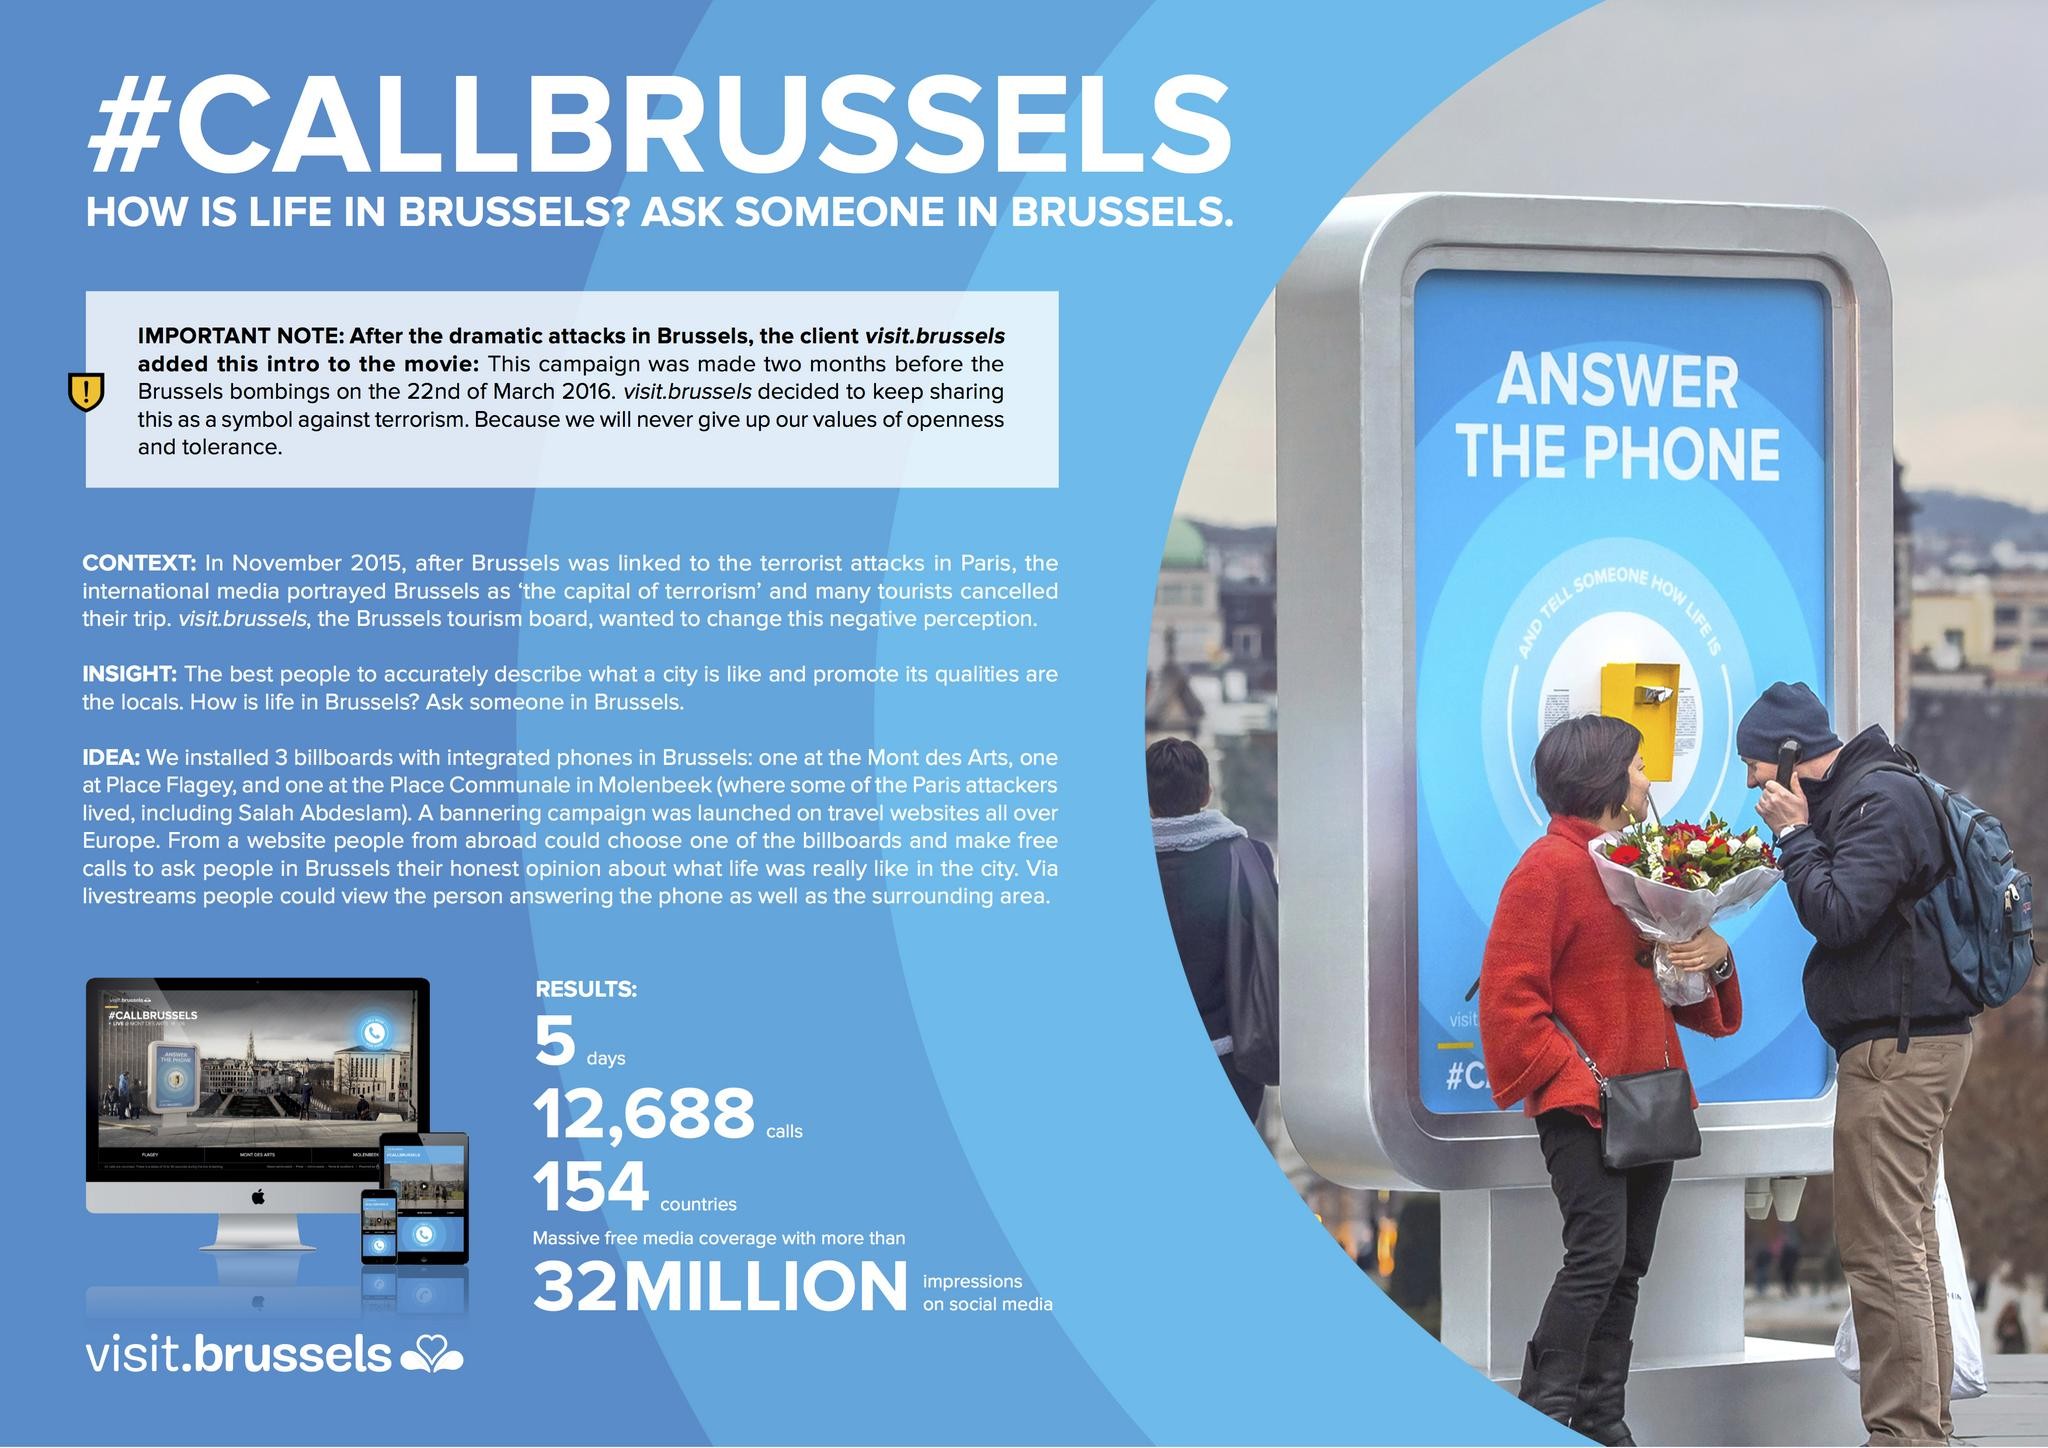 Call Brussels